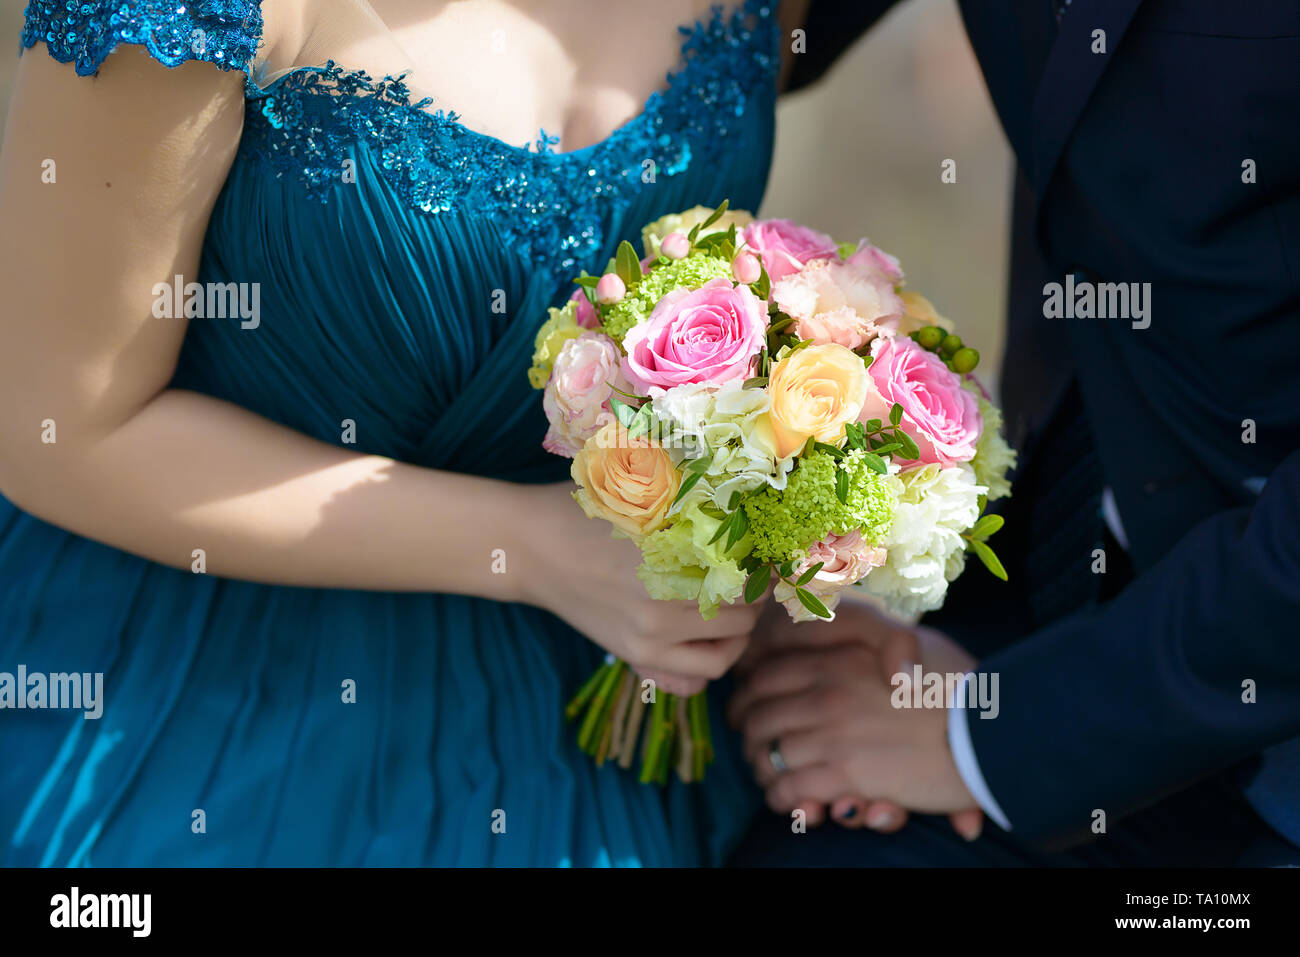 Bride wearing a blue dress and groom at the wedding with focus on bride's hands holding a large round bouquet featuring pastel colored roses Stock Photo